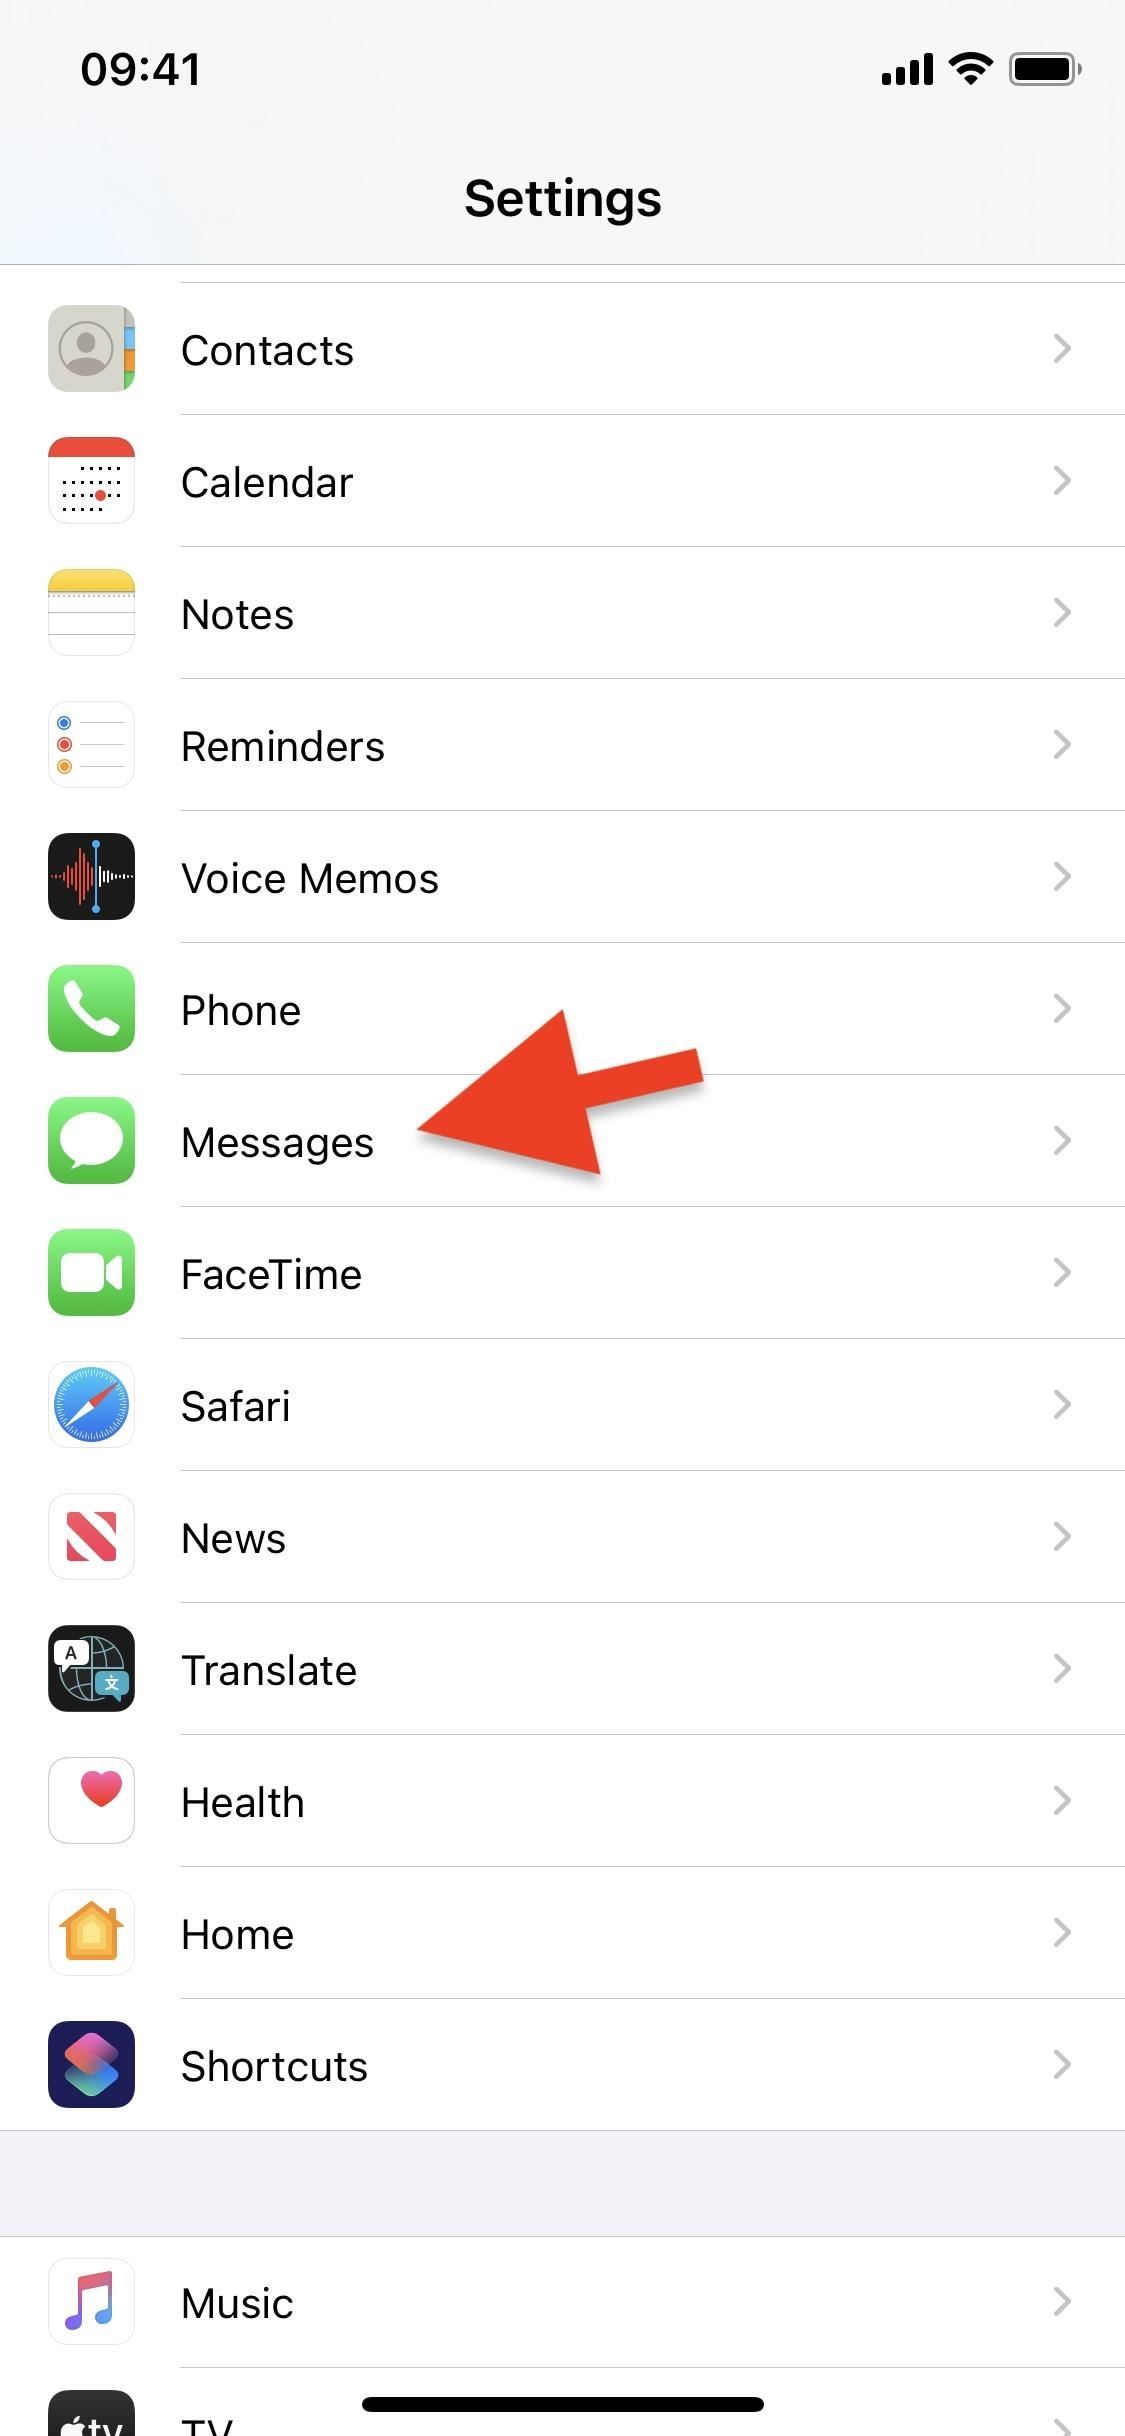 How to Get Notifications for Messages You're Mentioned in Only on Your iPhone